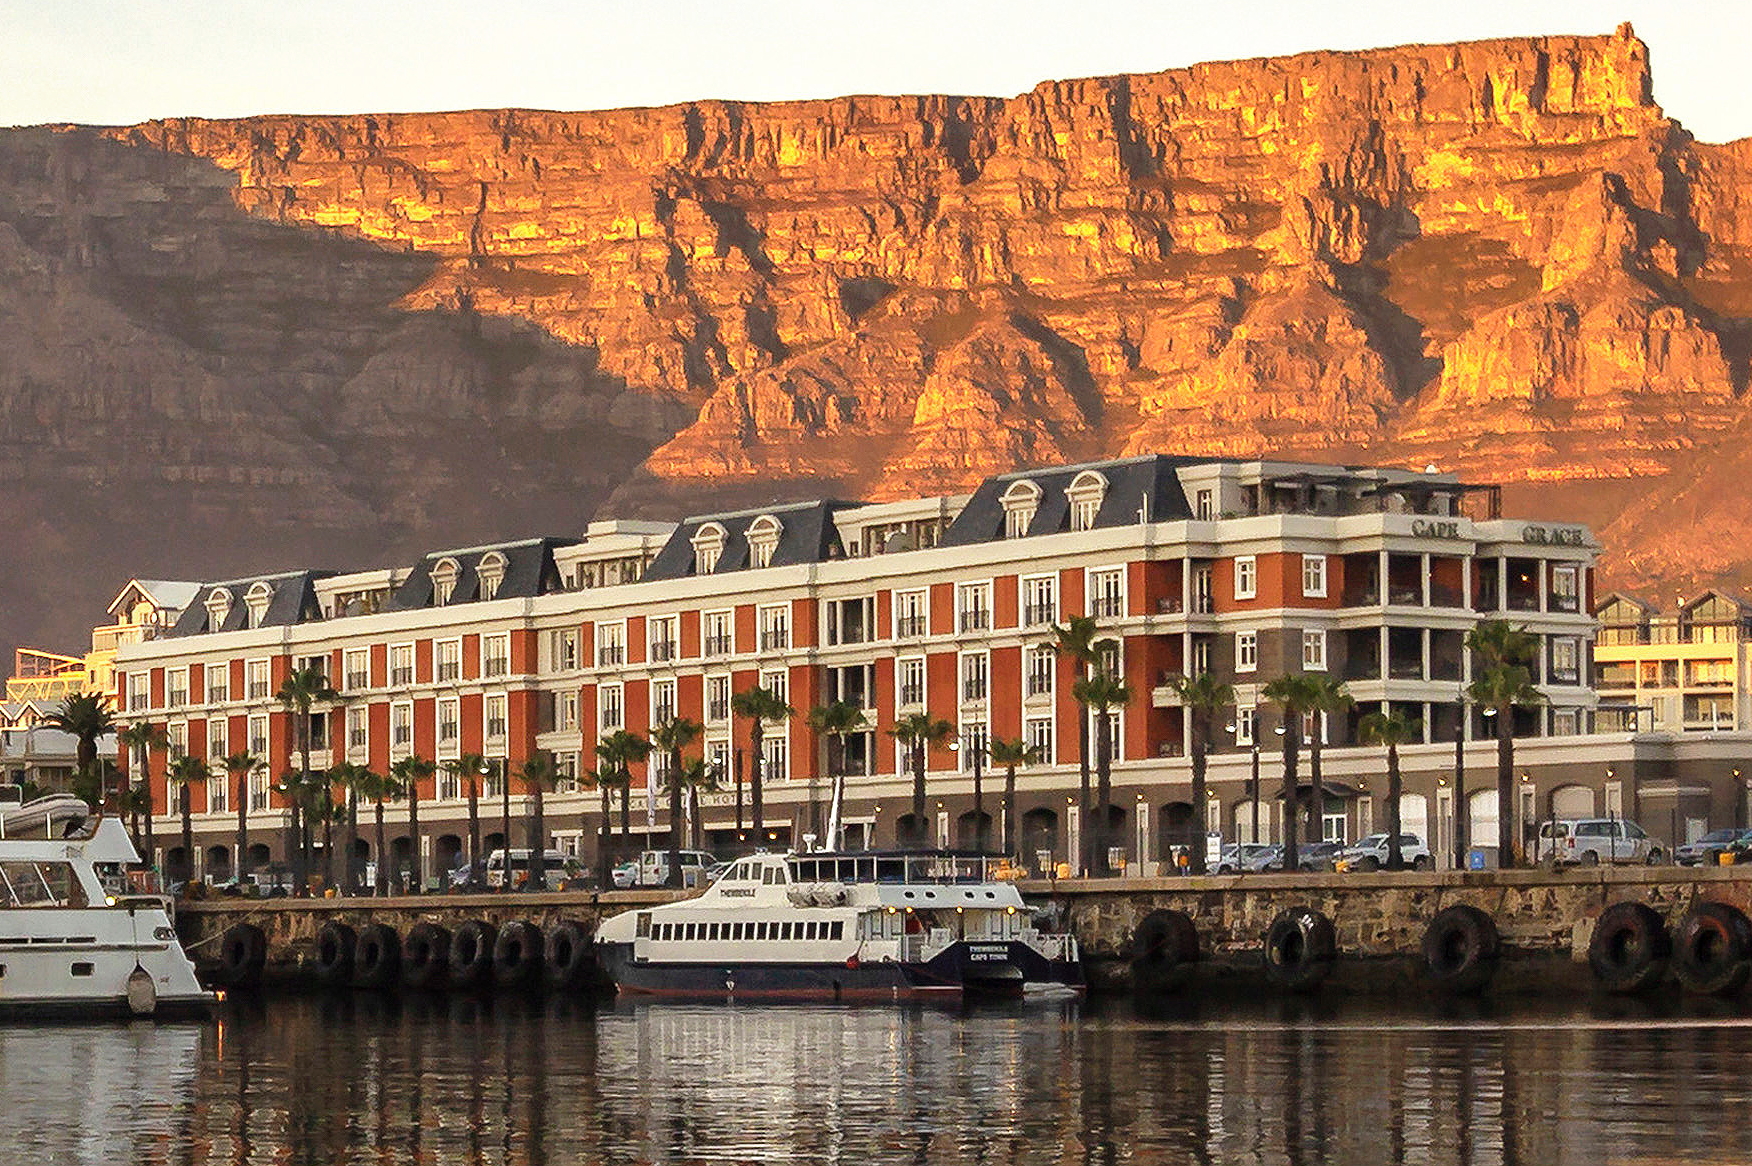 Cape Grace Hotel in Cape Town, South Africa. Click to enlarge.